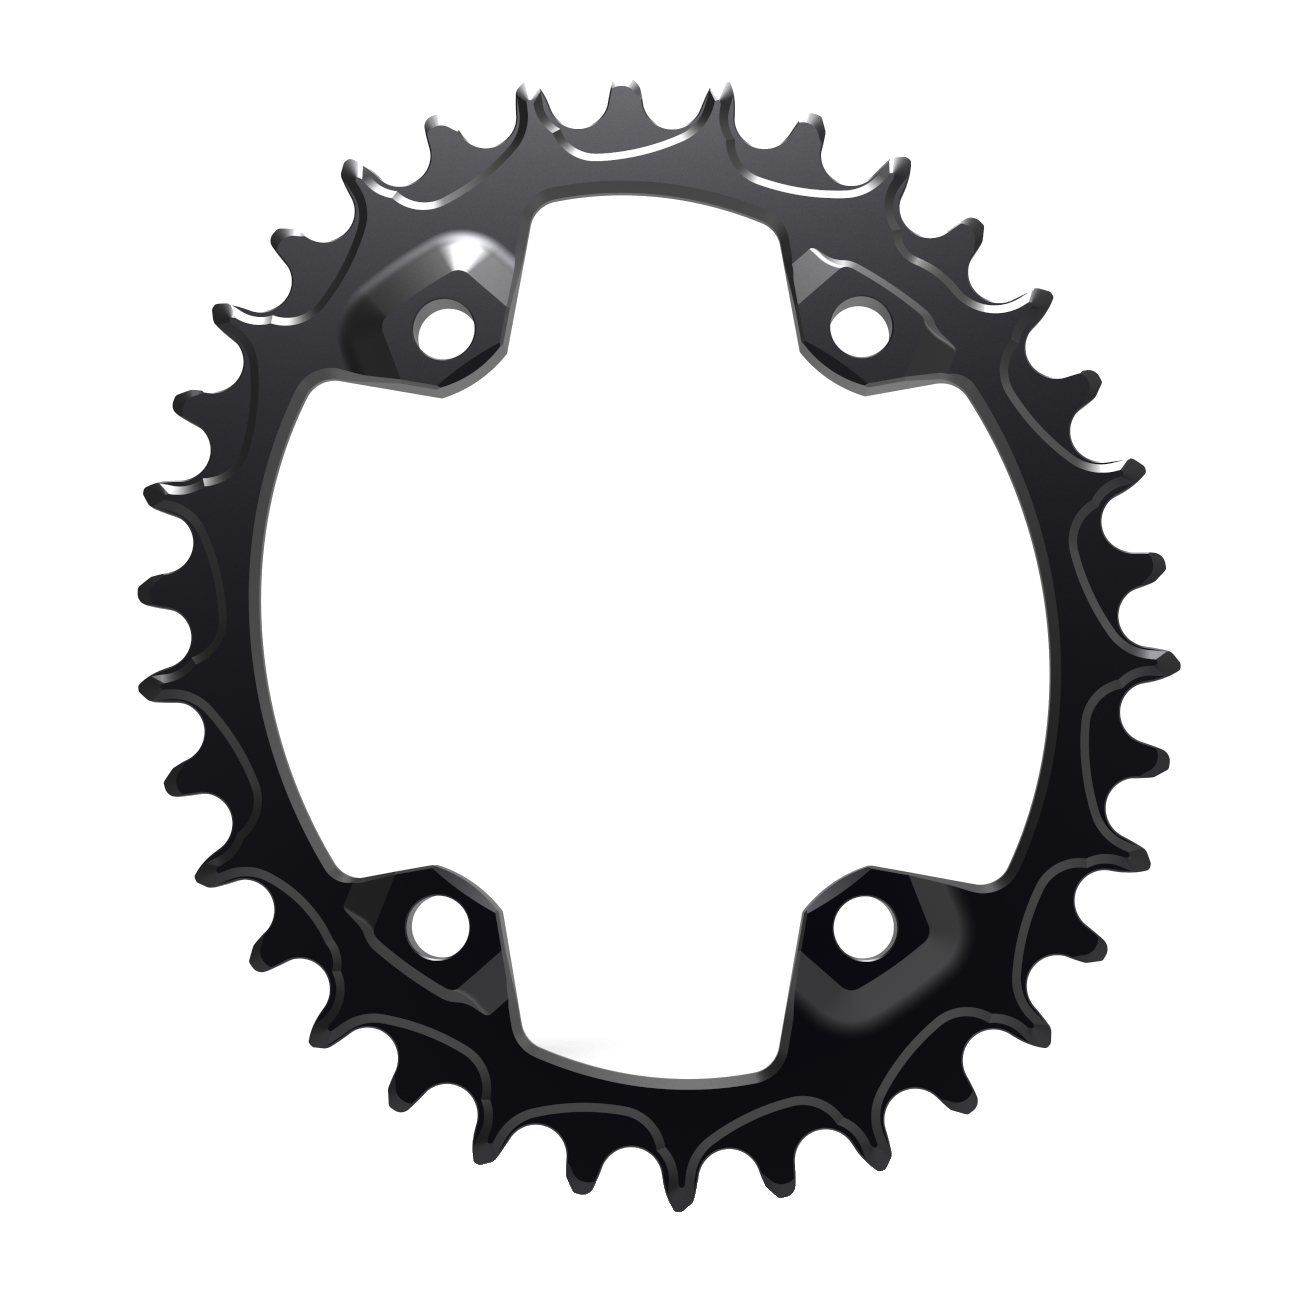 Productfoto van Alugear Narrow Wide MTB Chainring - Oval - for Shimano 96 BCD Asymmetric - 4-Bolt